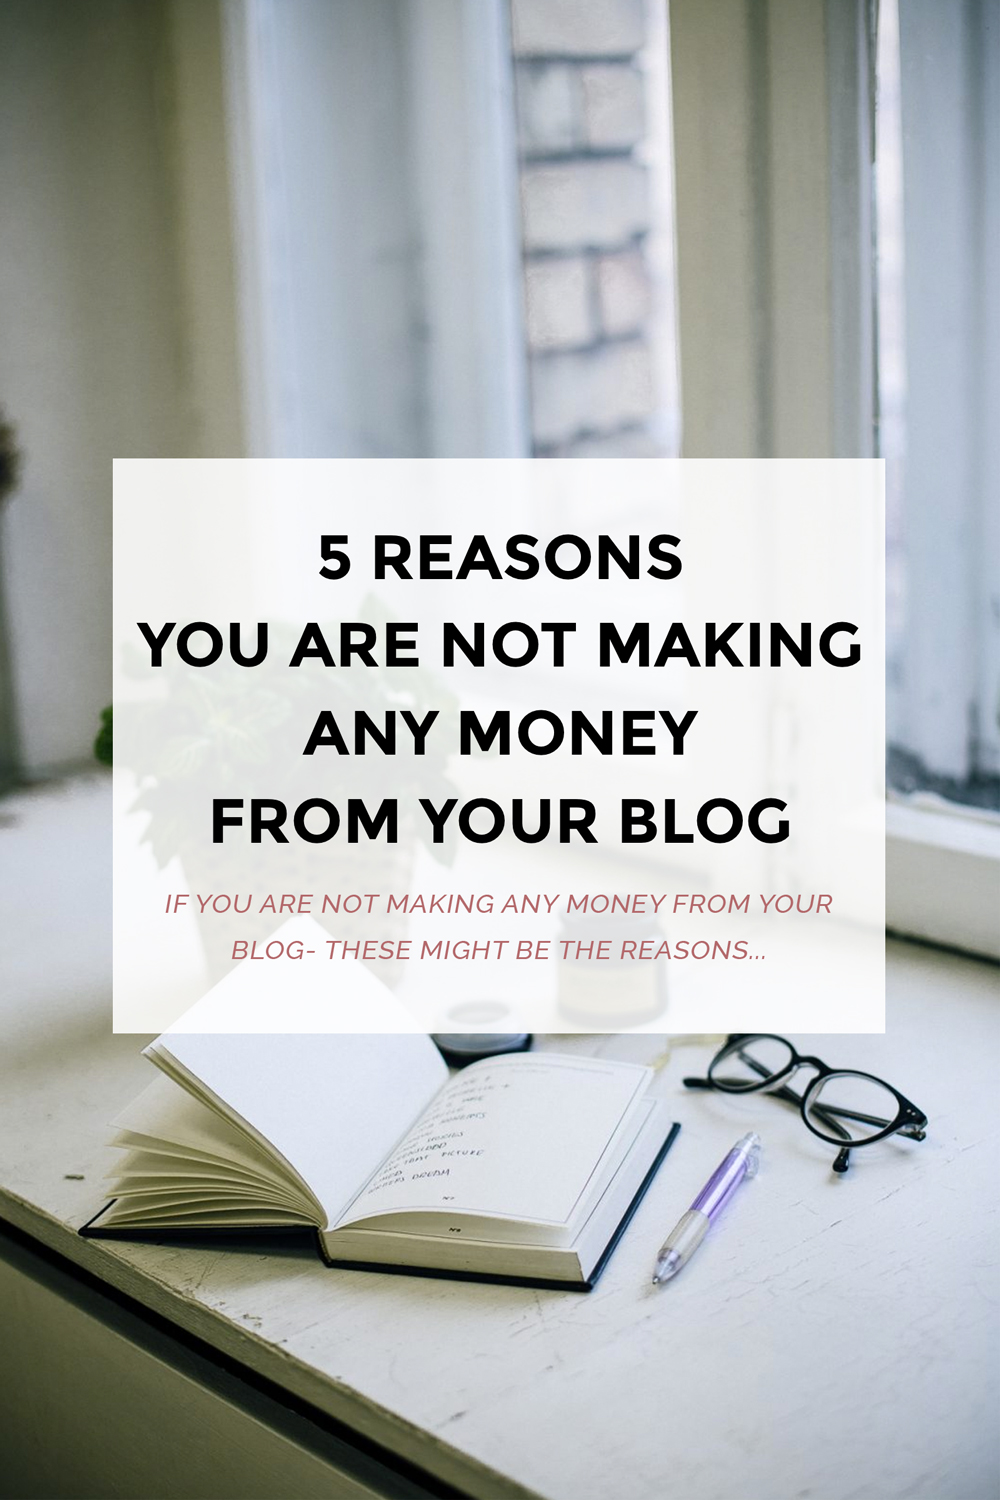 If You're Not Making Money From Your Blog These Might Be The Reasons